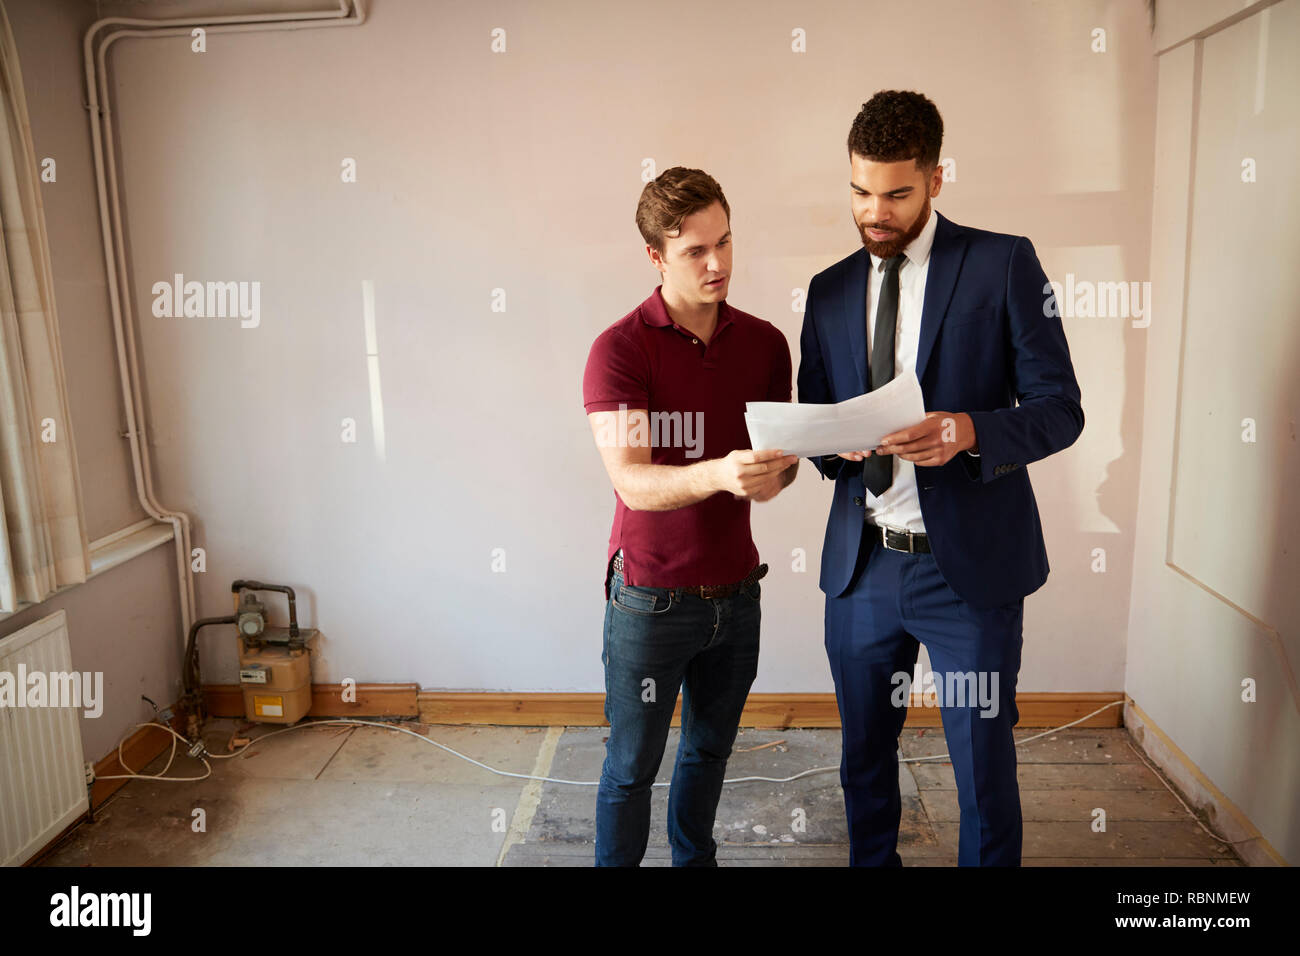 Male First Time Buyer Looking At House Survey With Realtor Stock Photo